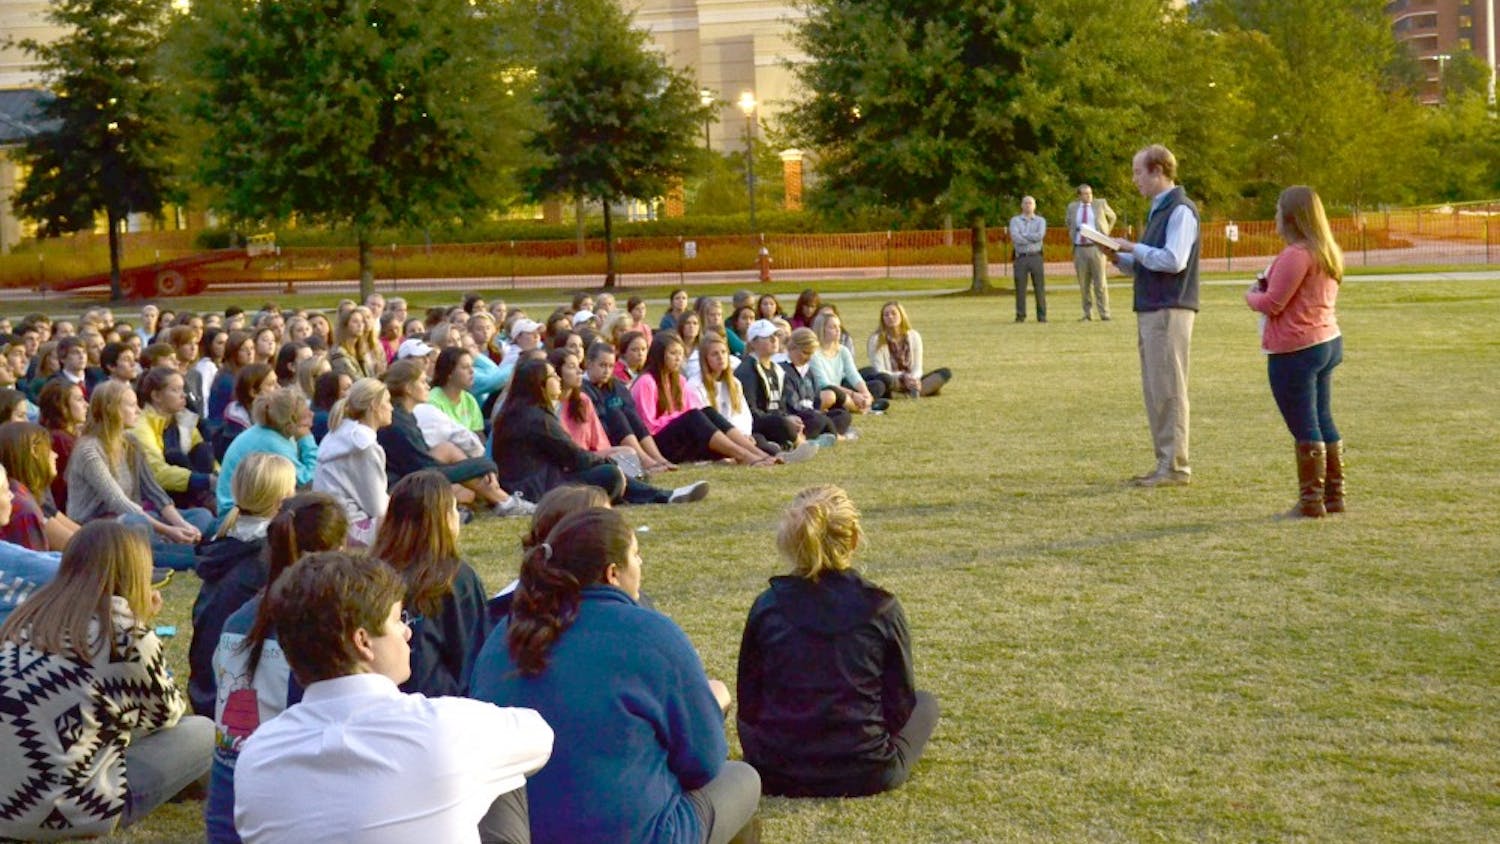 	Braxton Towery and his wife, Shelley, of Carolina CRU and Greek Impact, led students in a time of prayer and scripture in support of Martha Childress, the victim of Sunday’s shooting.